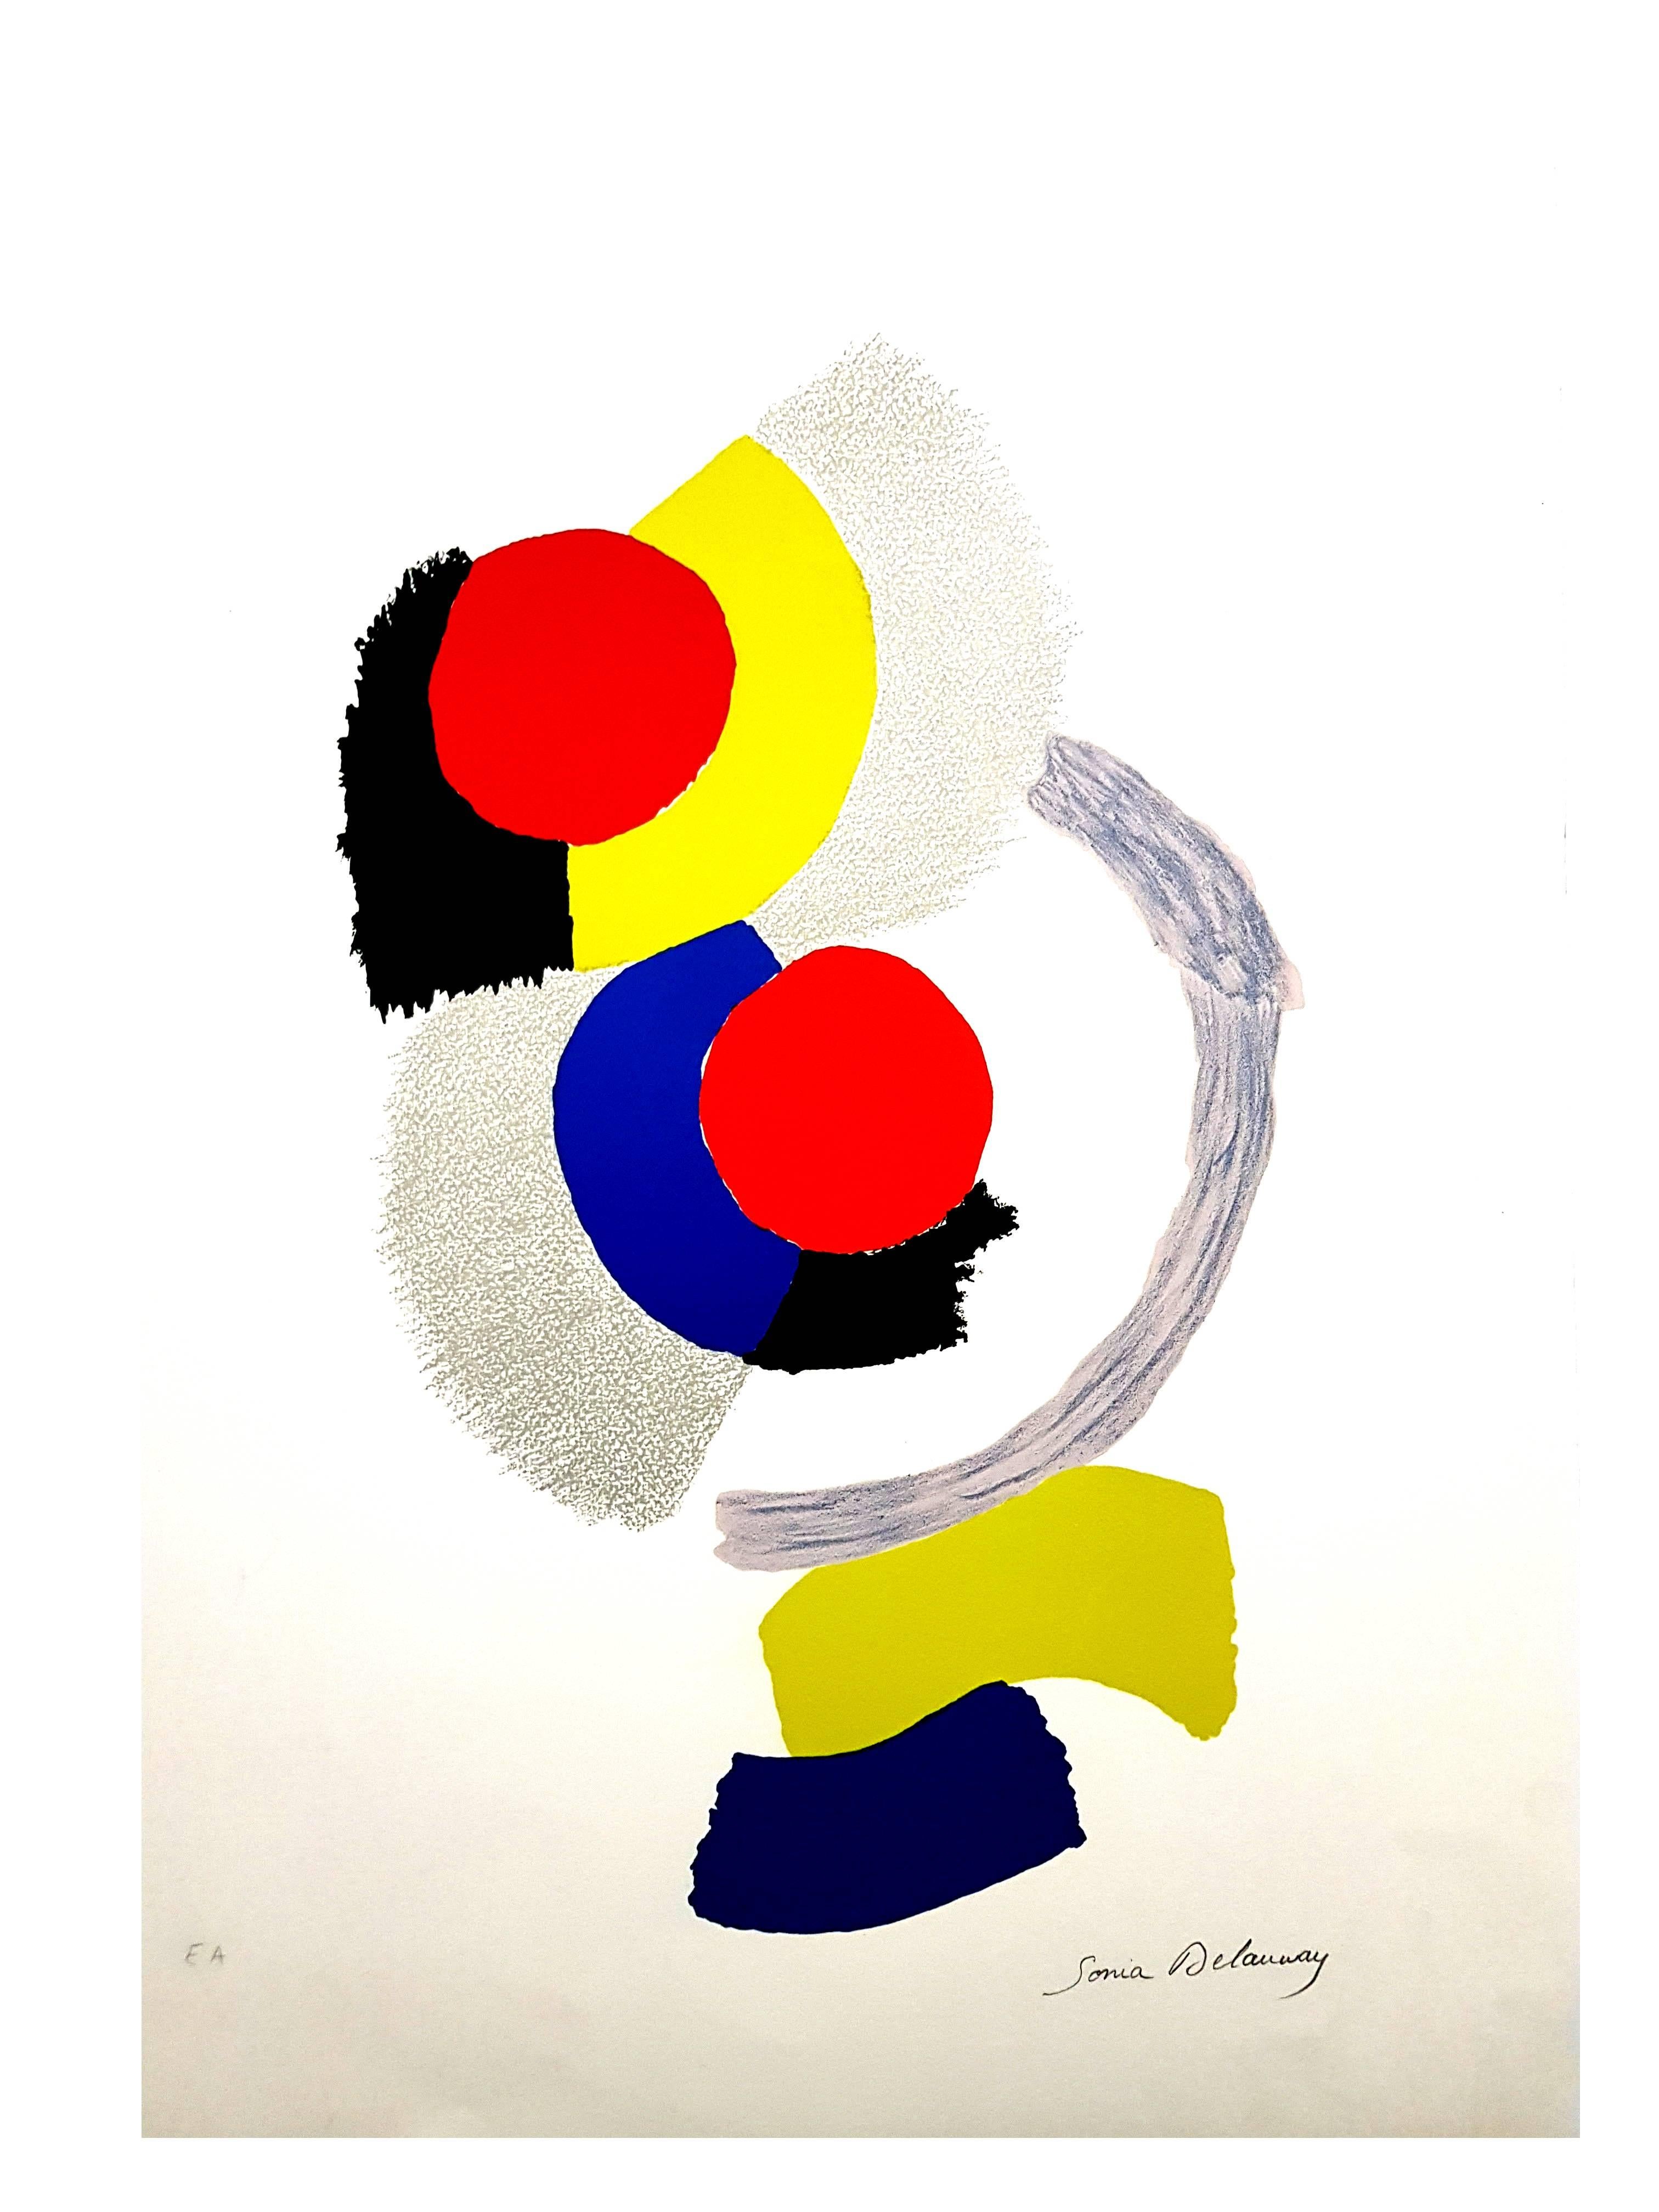 Sonia Delaunay - Composition 
Original Lithograph
Circa 1960
Dimensions: 65 x 50 cm

Sonia Delaunay was known for her vivid use of color and her bold, abstract patterns, breaking down traditional distinctions between the fine and applied arts as an